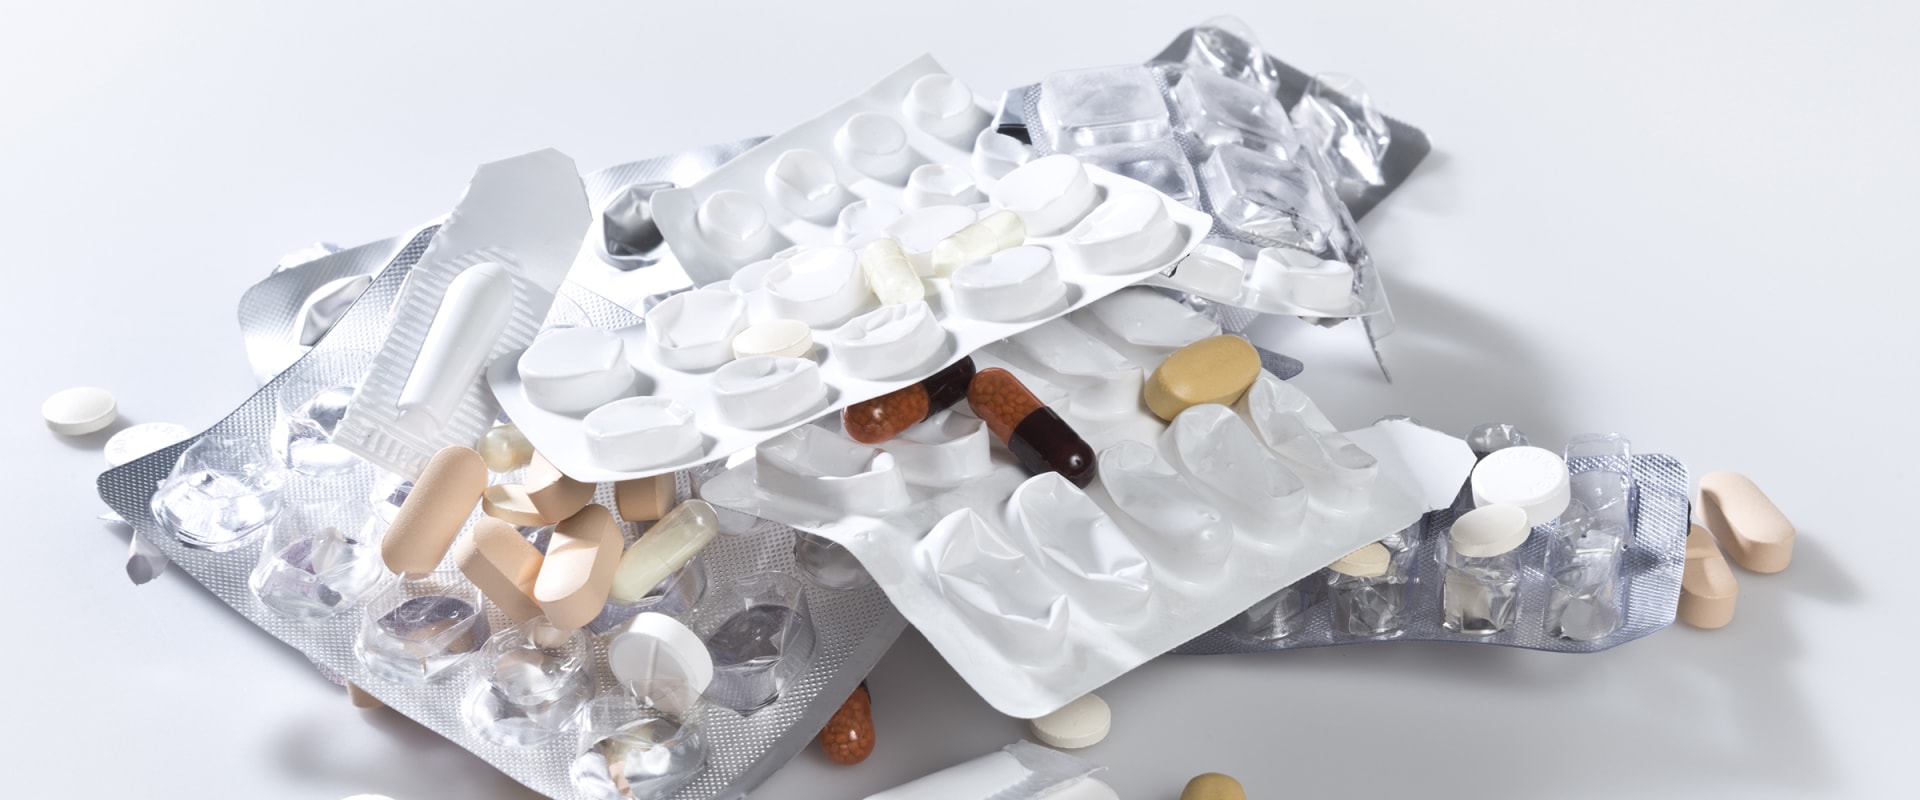 How to Safely Dispose of Expired Supplements and Medications